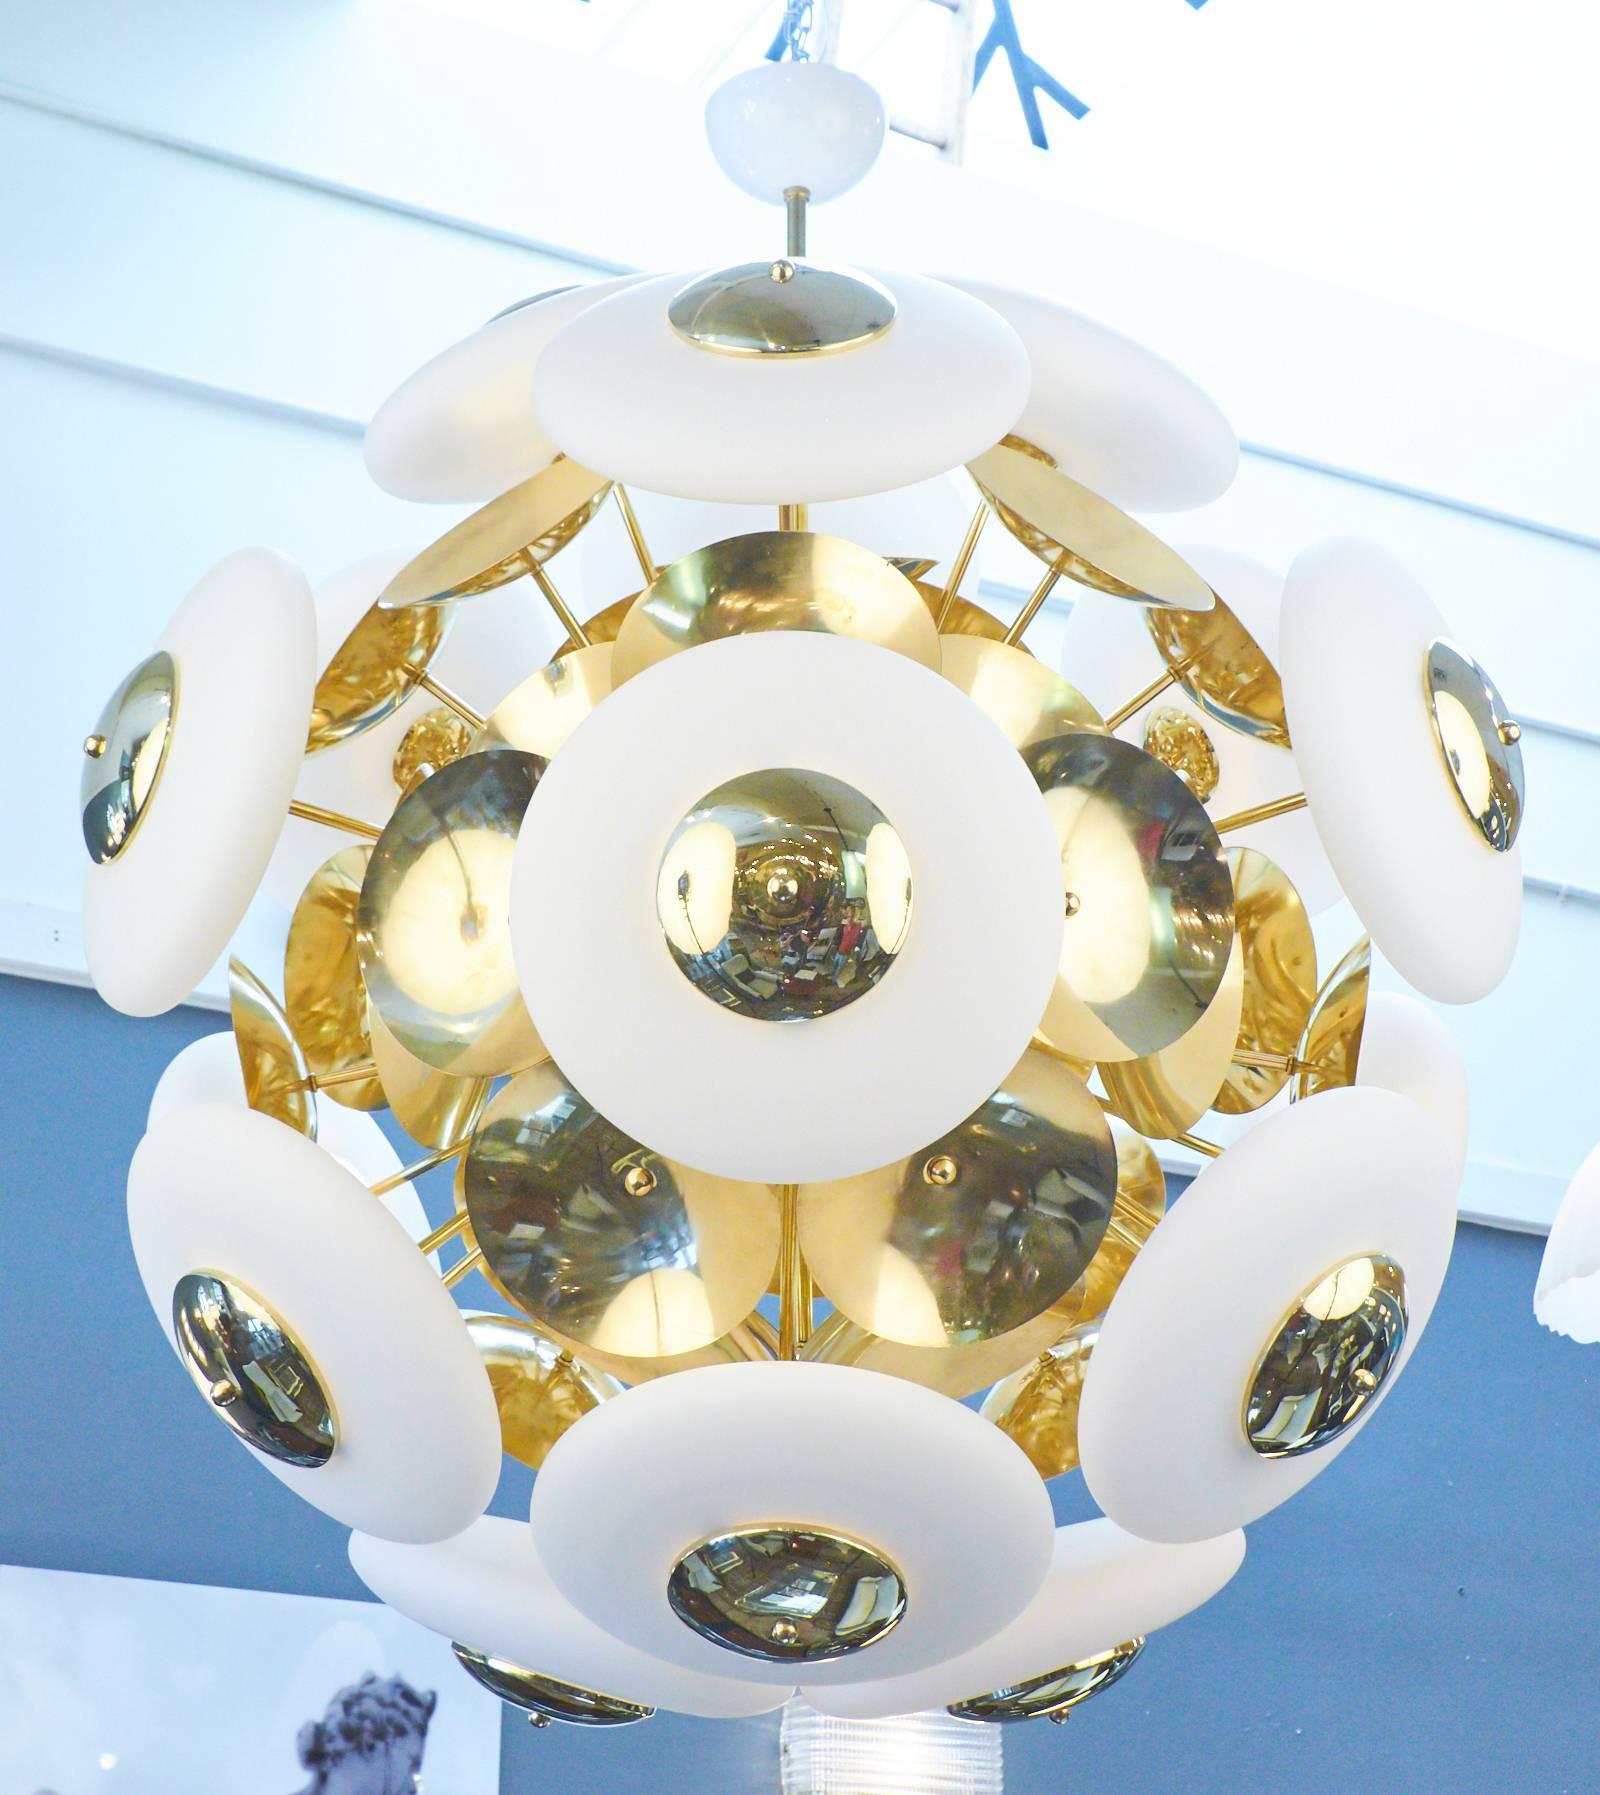 A unique and wonderful Italian chandelier with 18 white Murano glass orb shades complimented by brass discs on a spherical structure. Rewired for the US.

This fixture is currently located at our dealer's warehouse in Italy. Please contact us for a